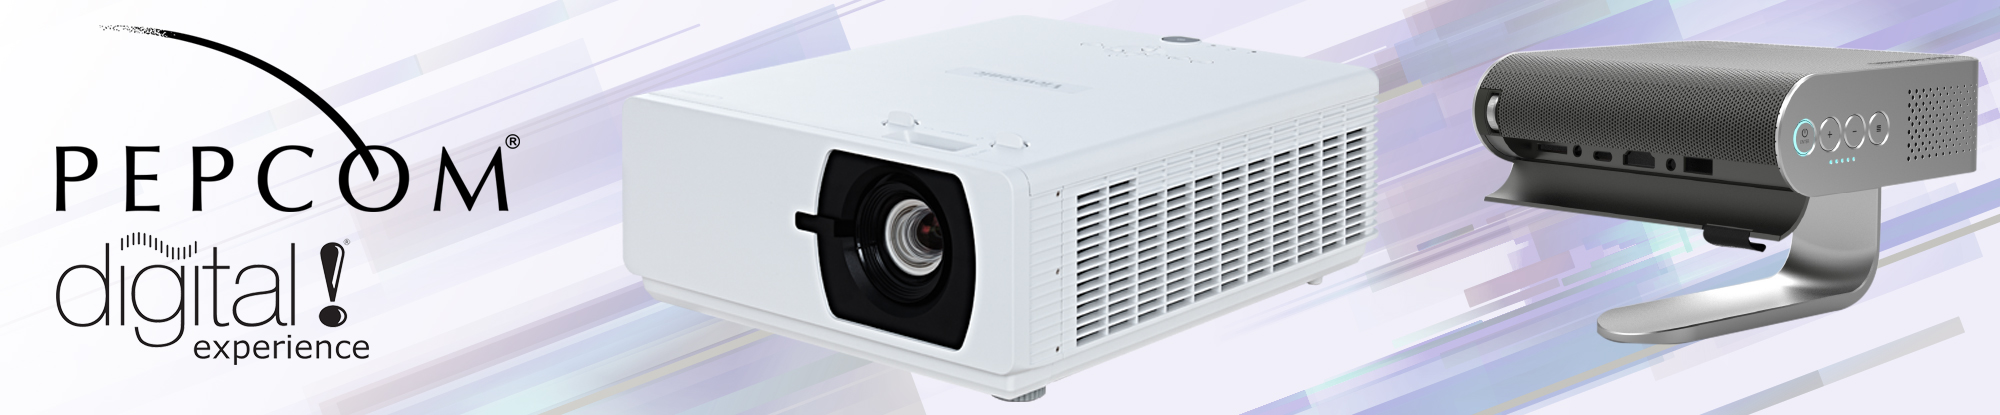 ViewSonic Expansion: New Laser Commercial Projector & New Pico Projector -